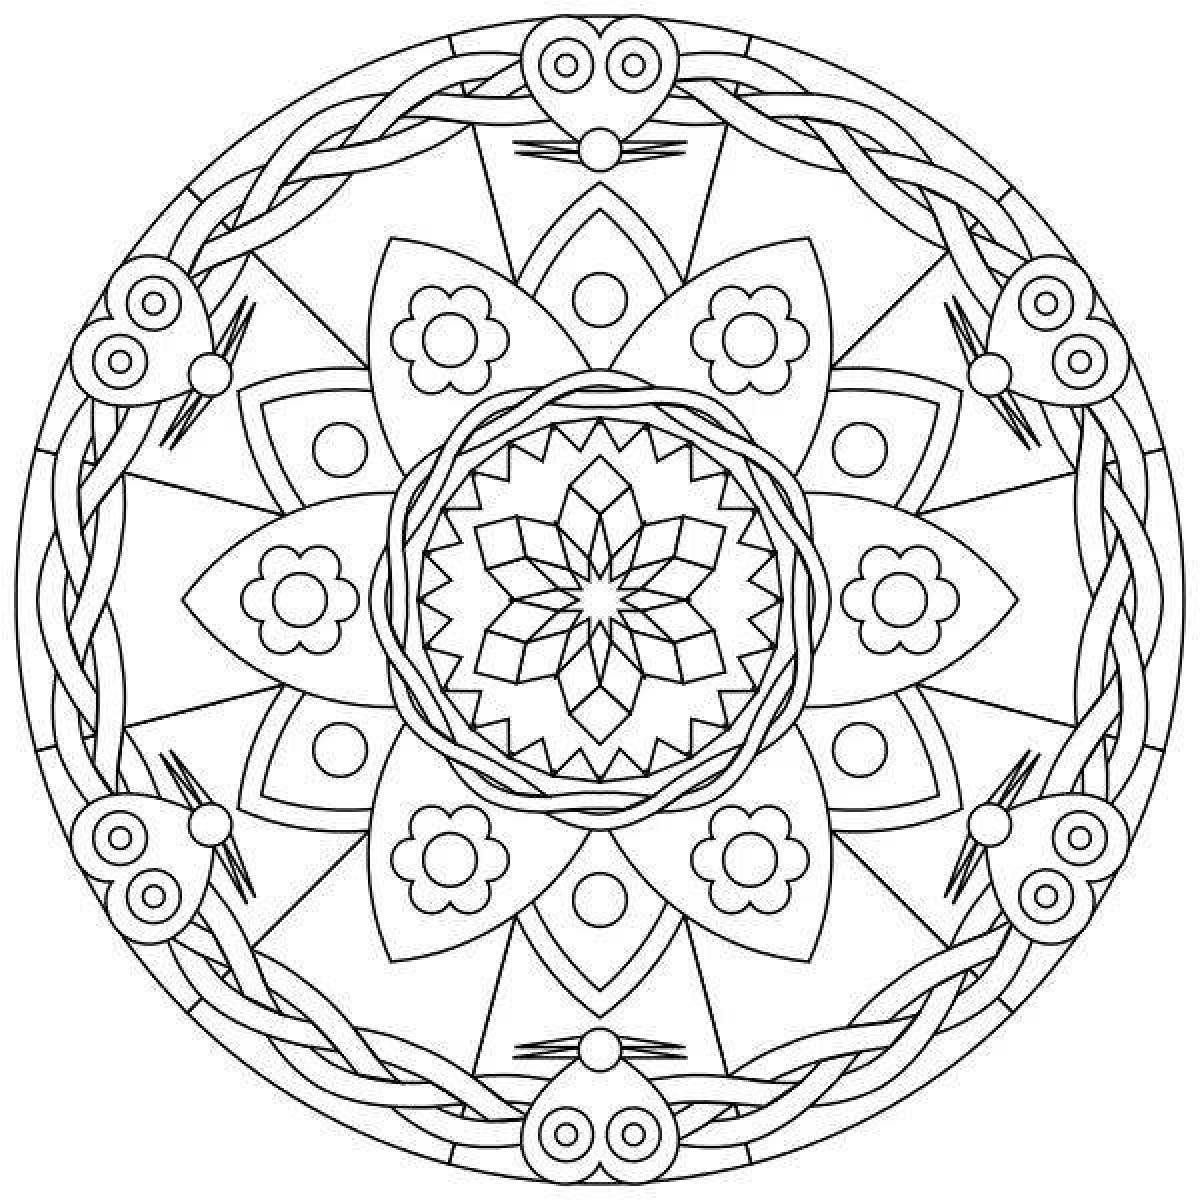 Joyful mantra coloring pages